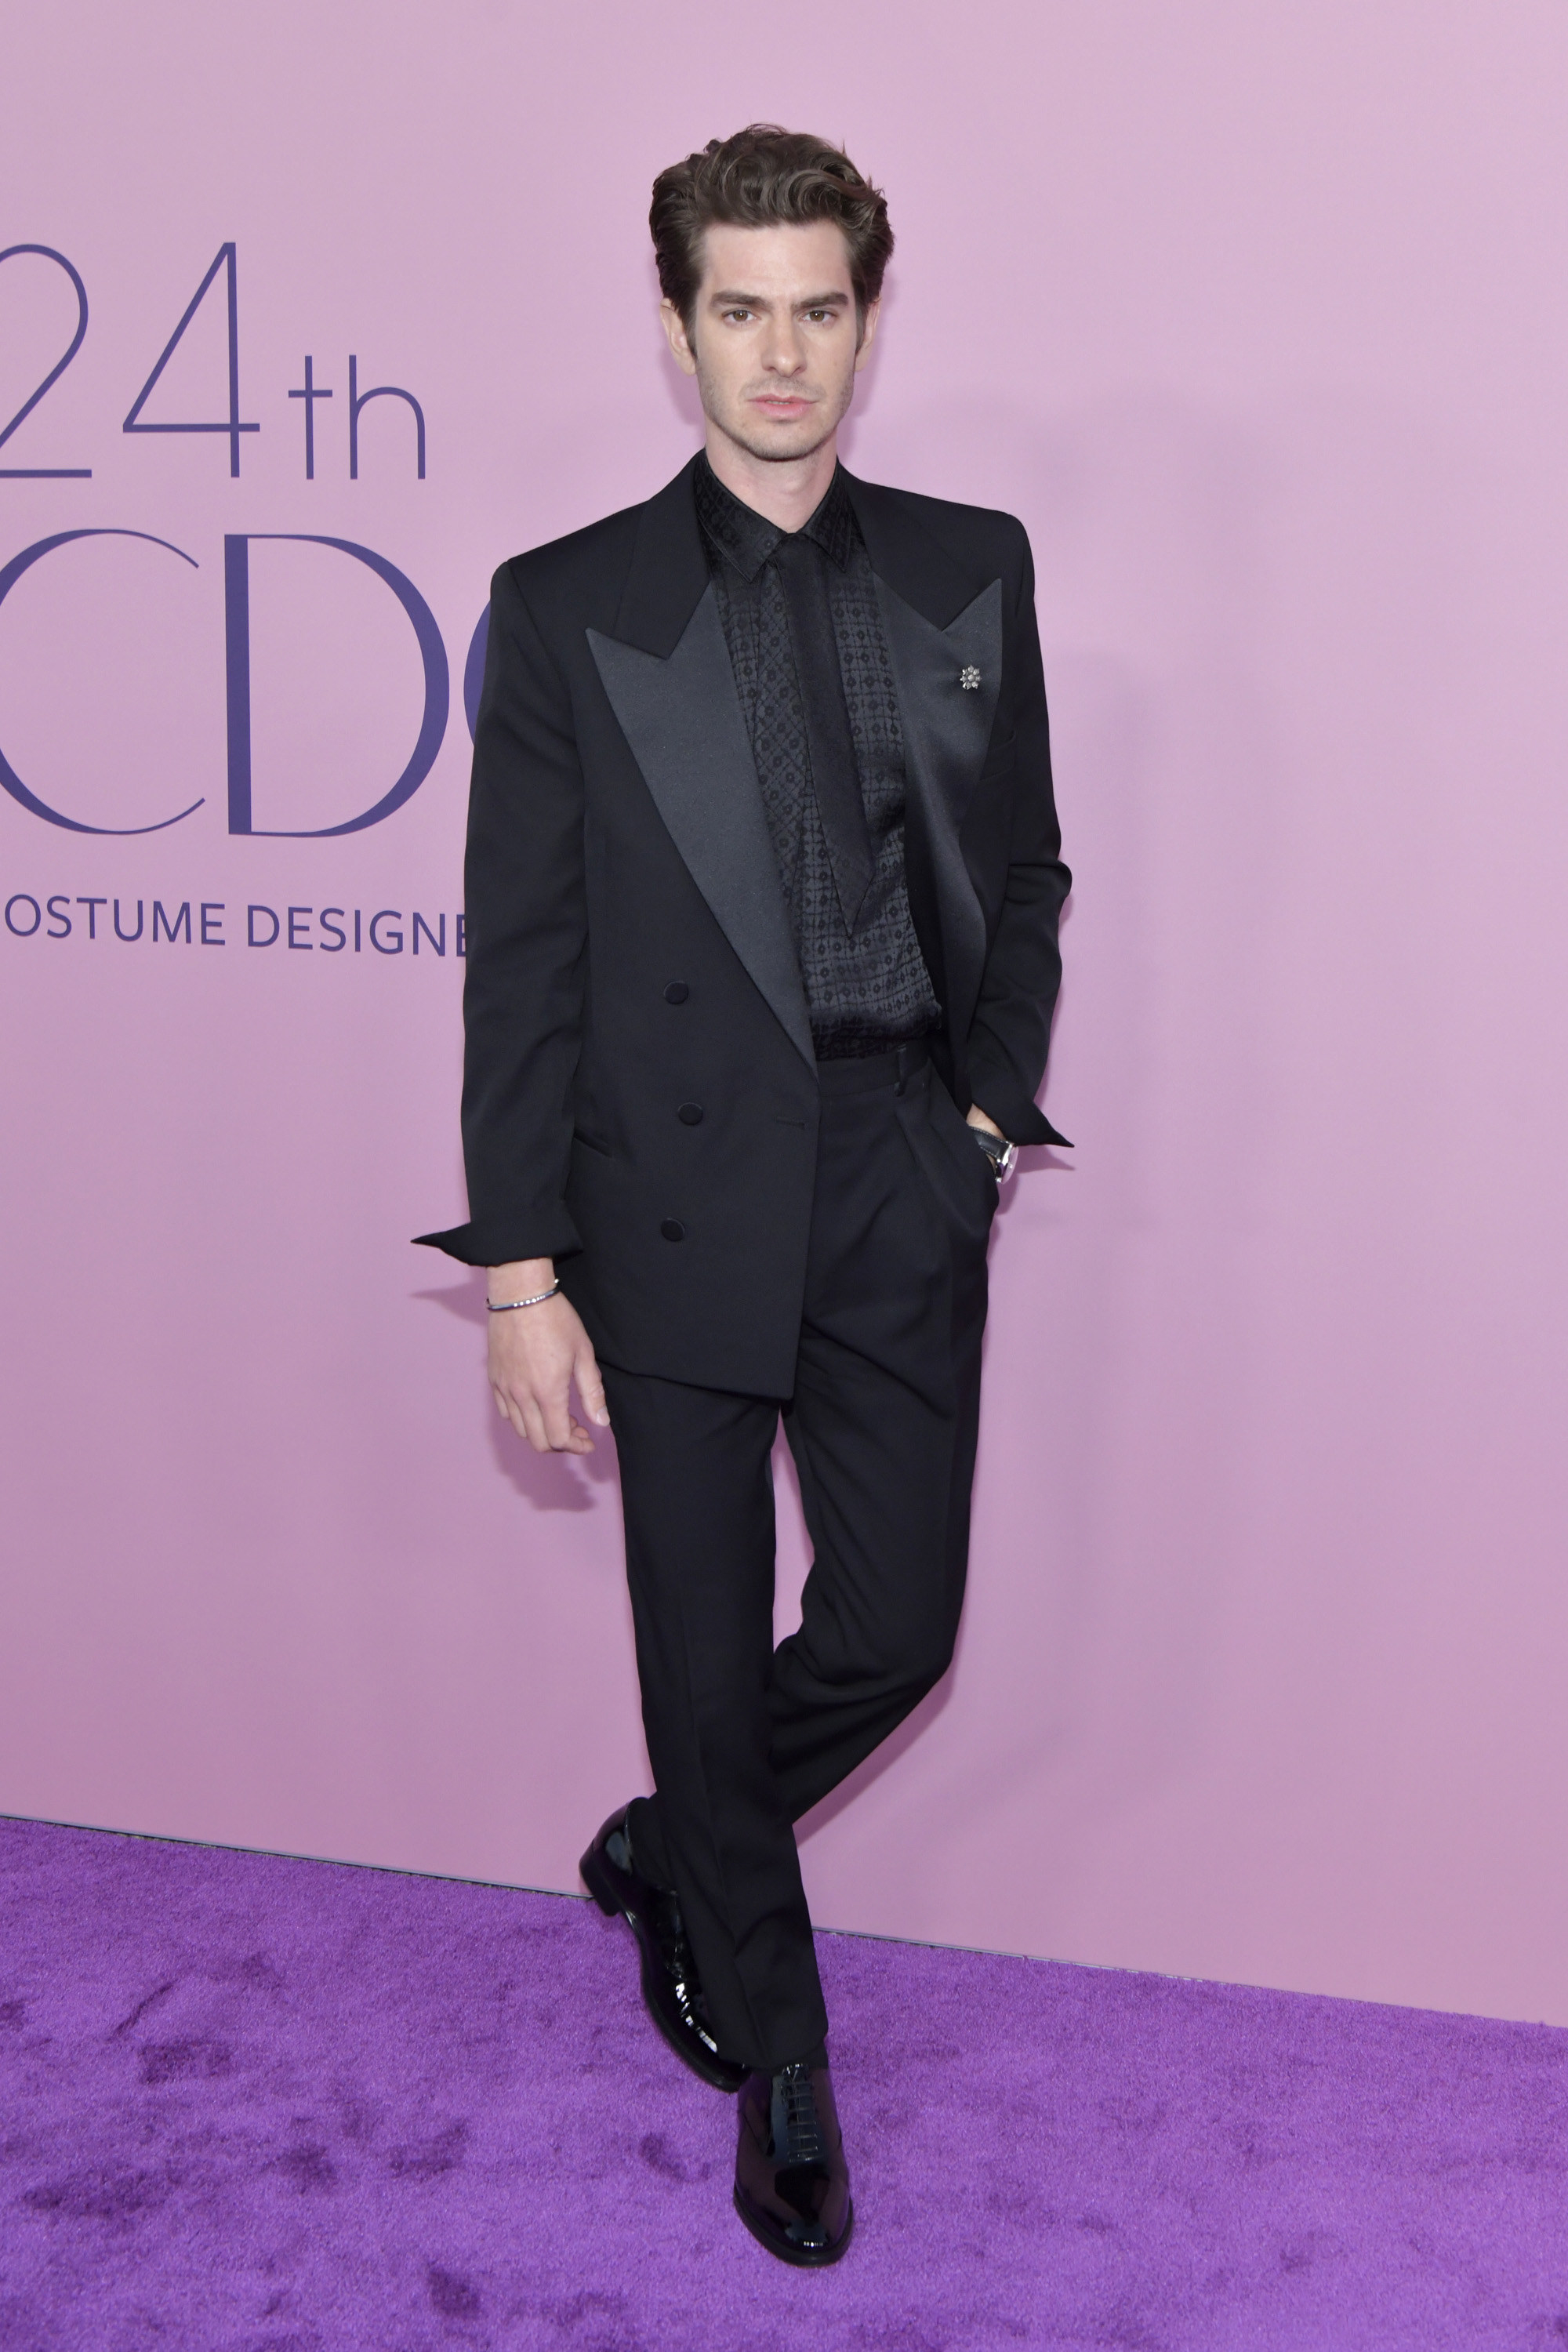 Andrew wears a black suit with wide silk lapels